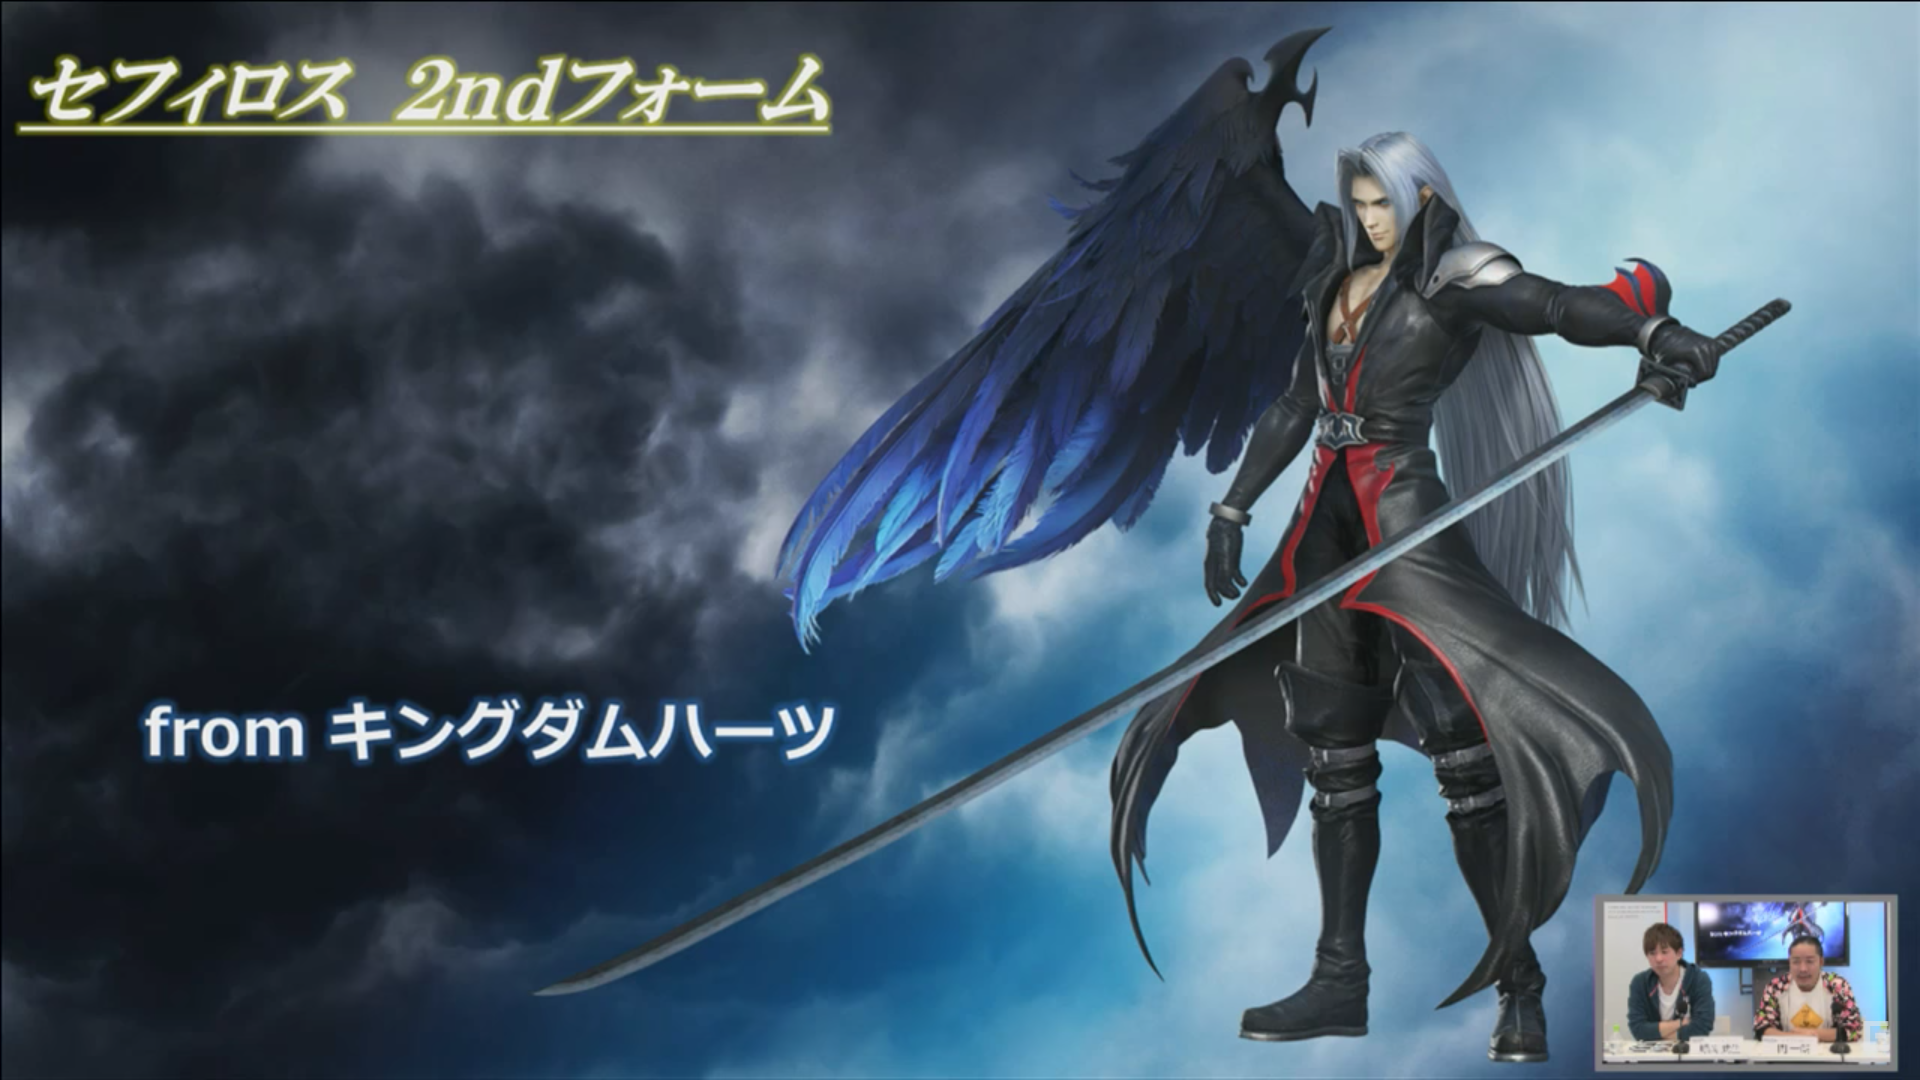 Sephiroth%201.png